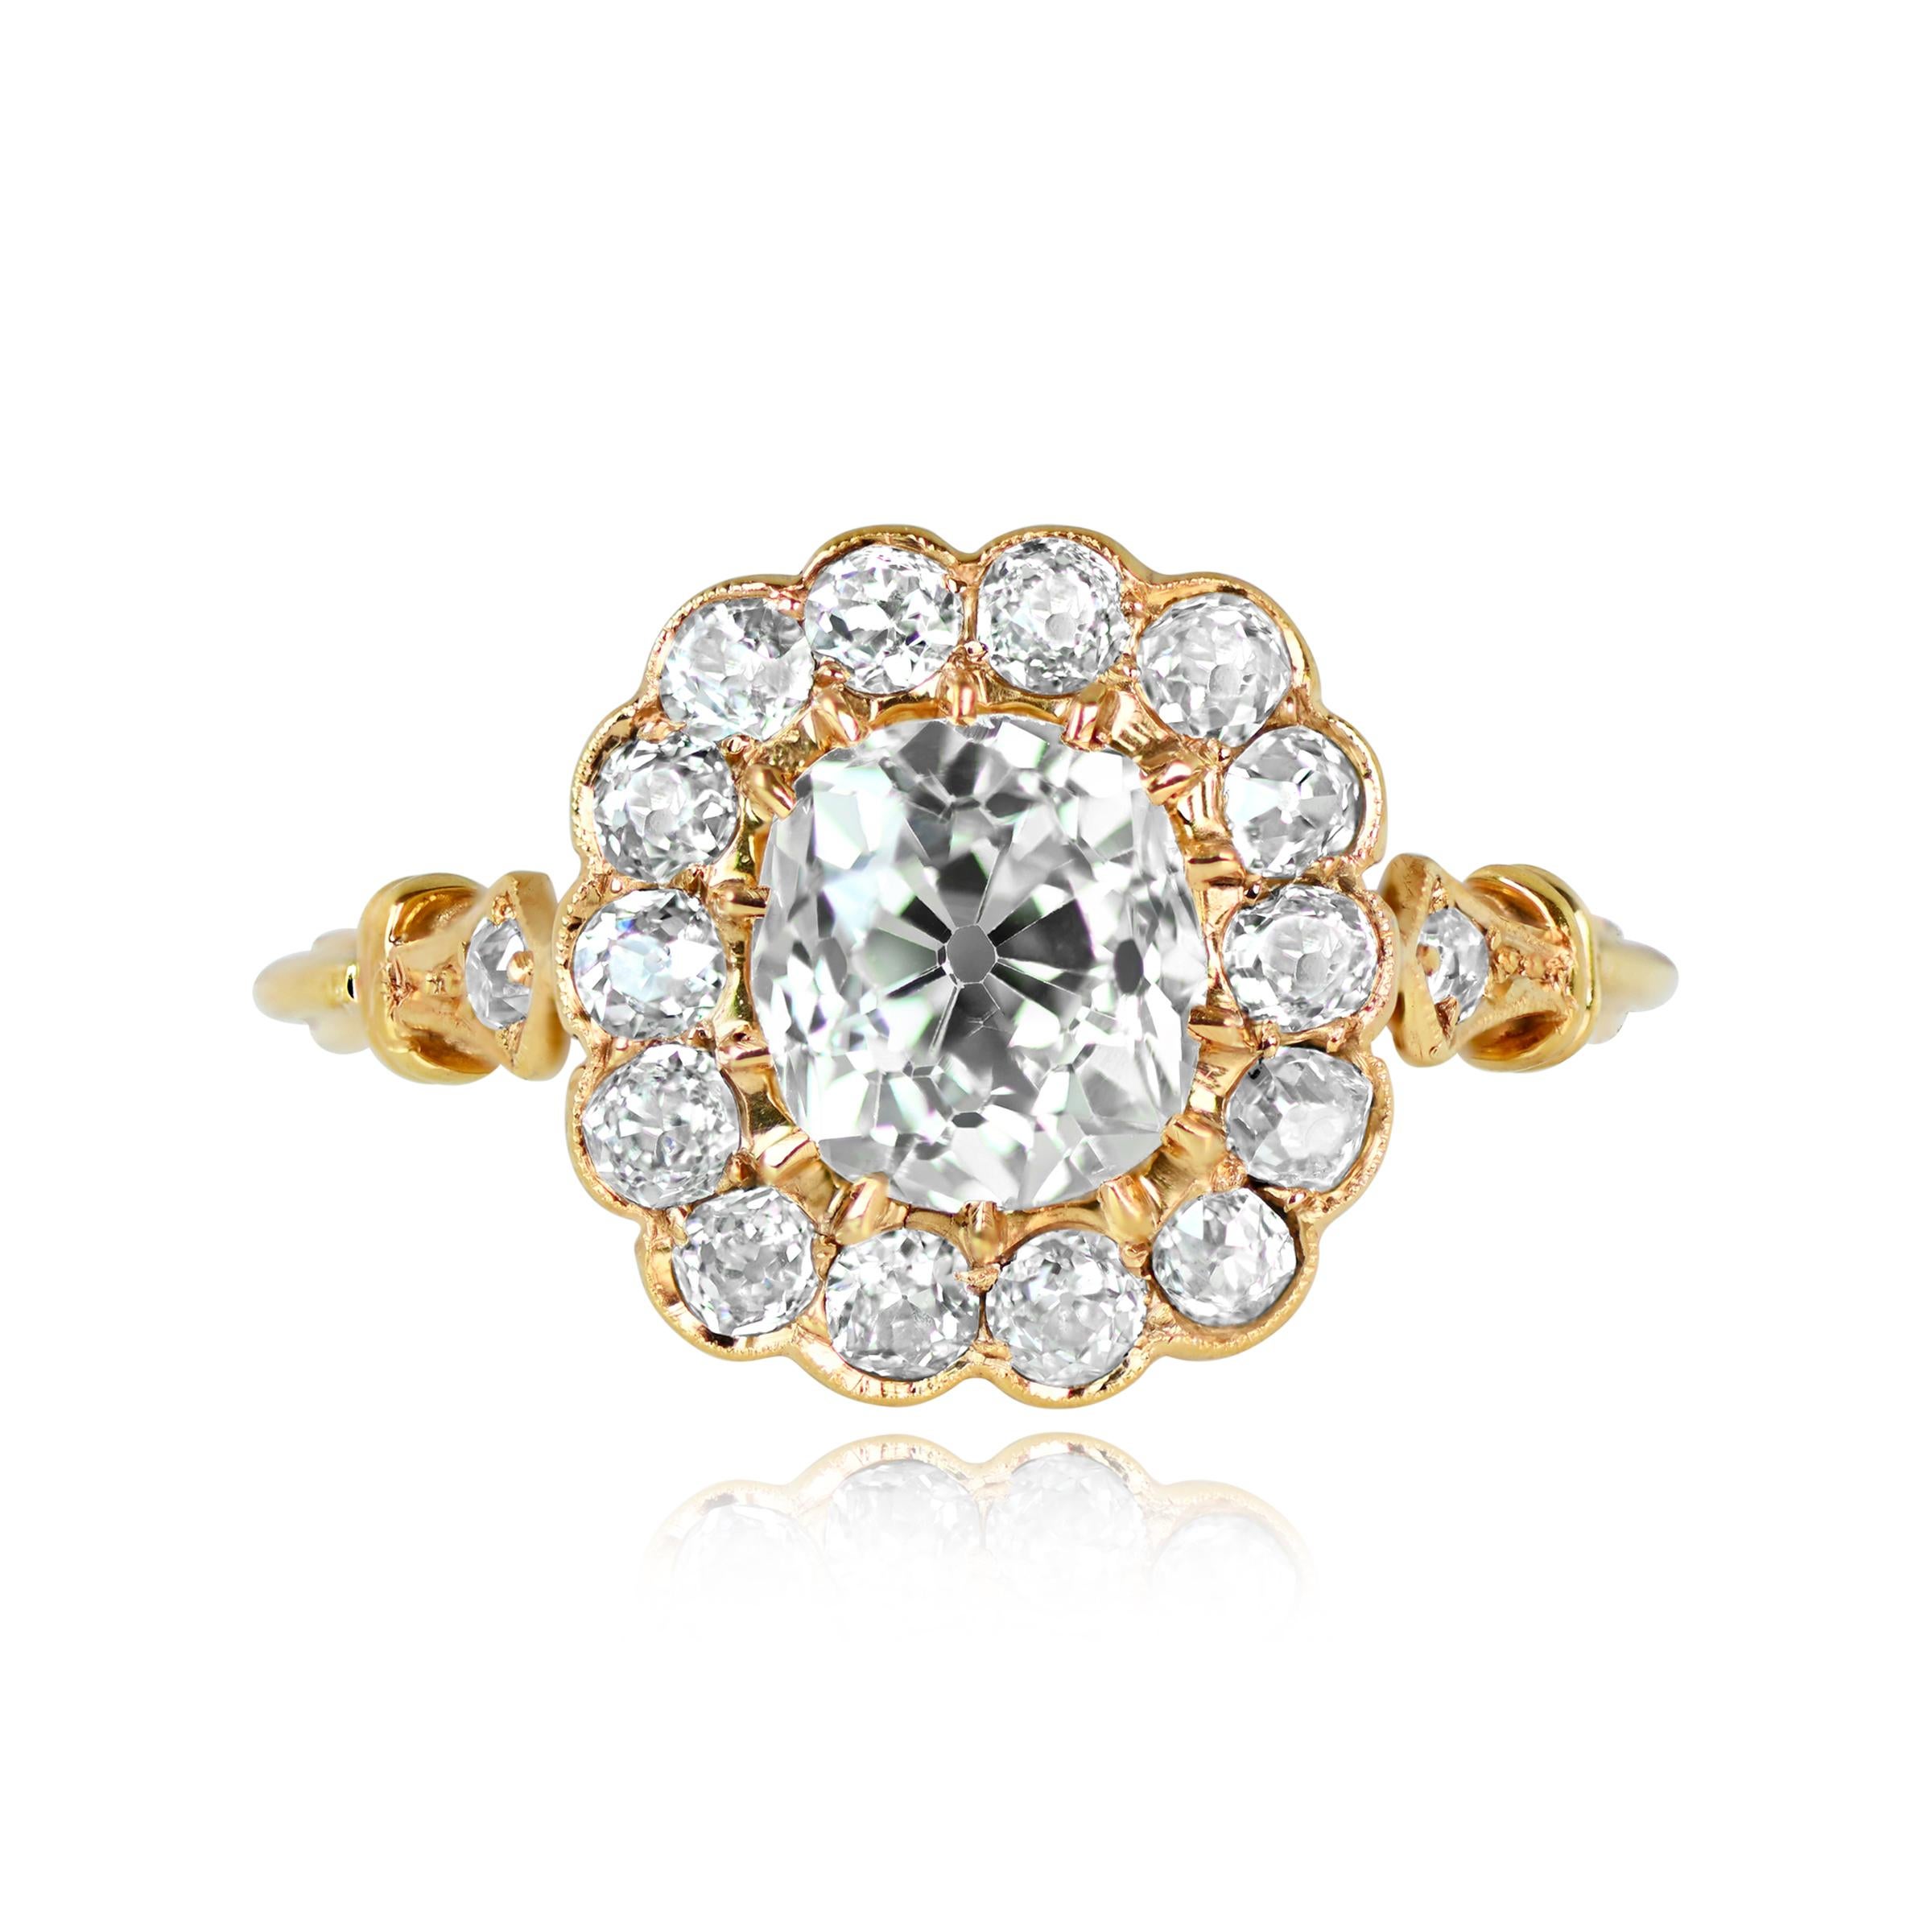 A captivating cluster engagement ring showcases a vibrant antique cushion cut diamond, around 1.30 carats, with K color and VS1 clarity. An ensemble of old mine-cut diamonds forms a delightful cluster around the center stone, totaling approximately